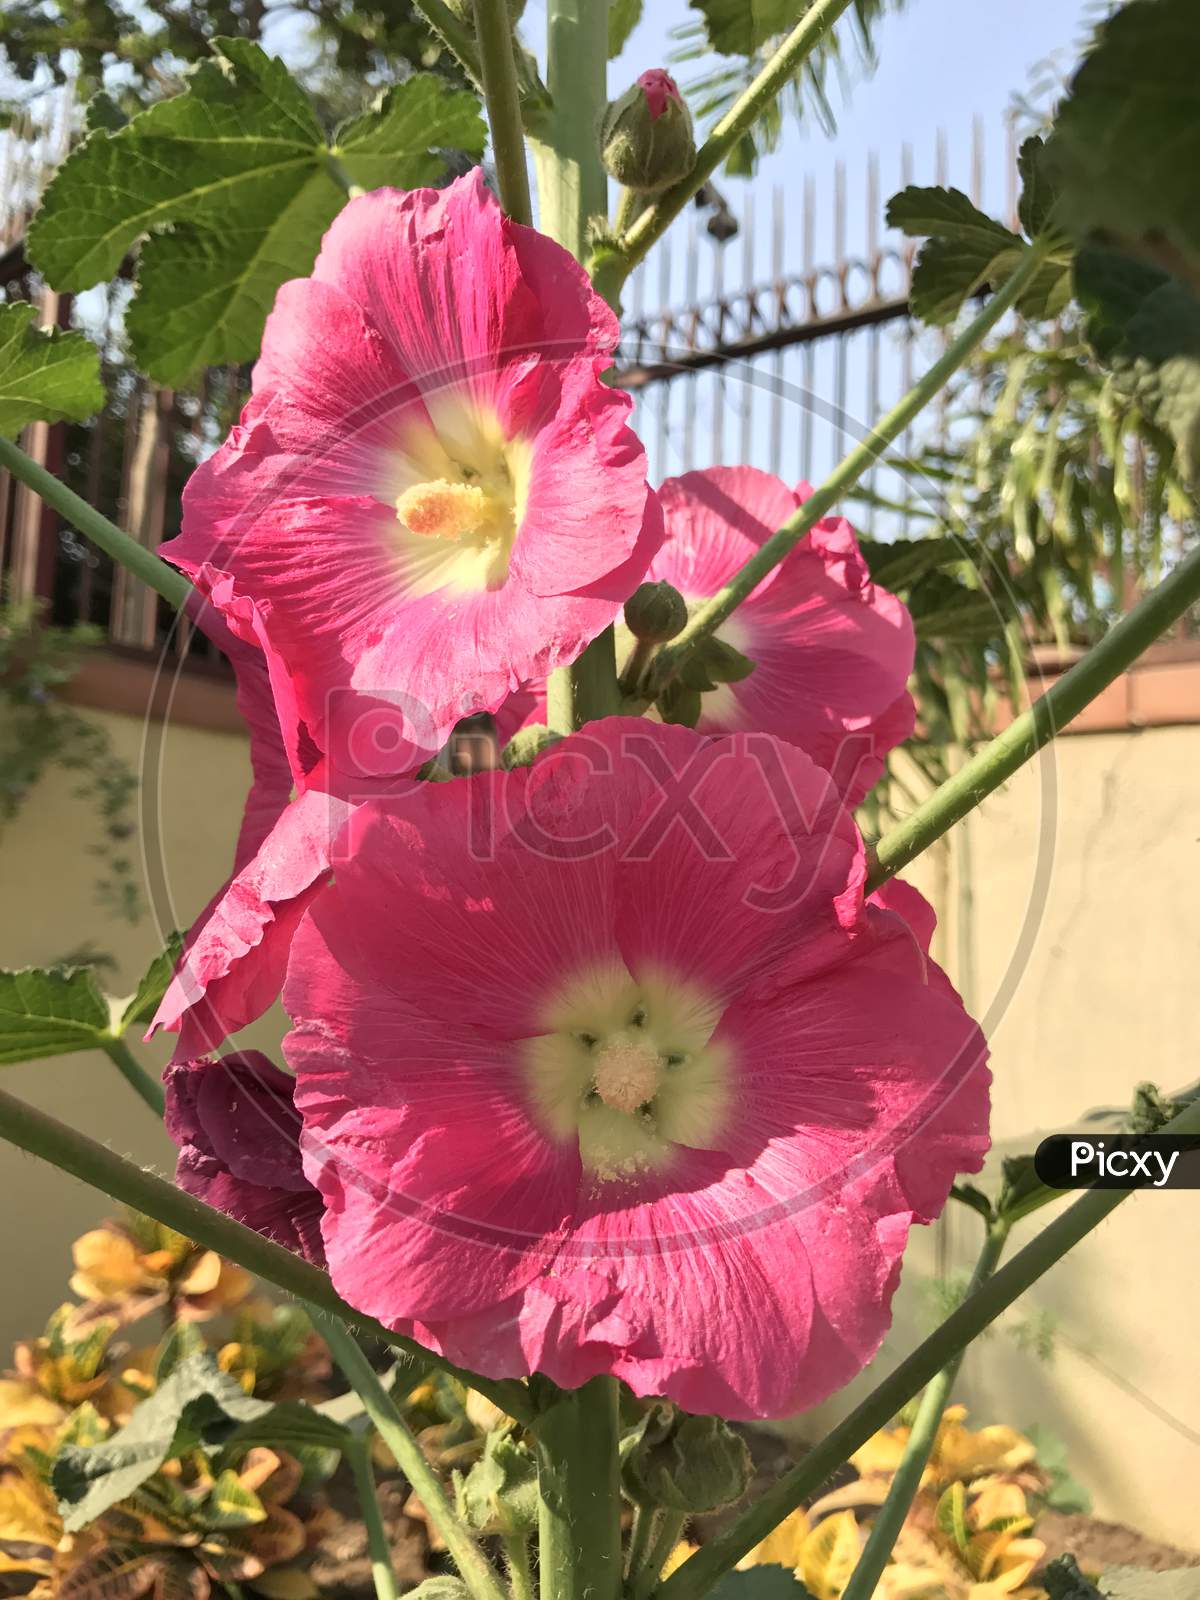 Fresh Flowers Blooming on Plants in an House Garden